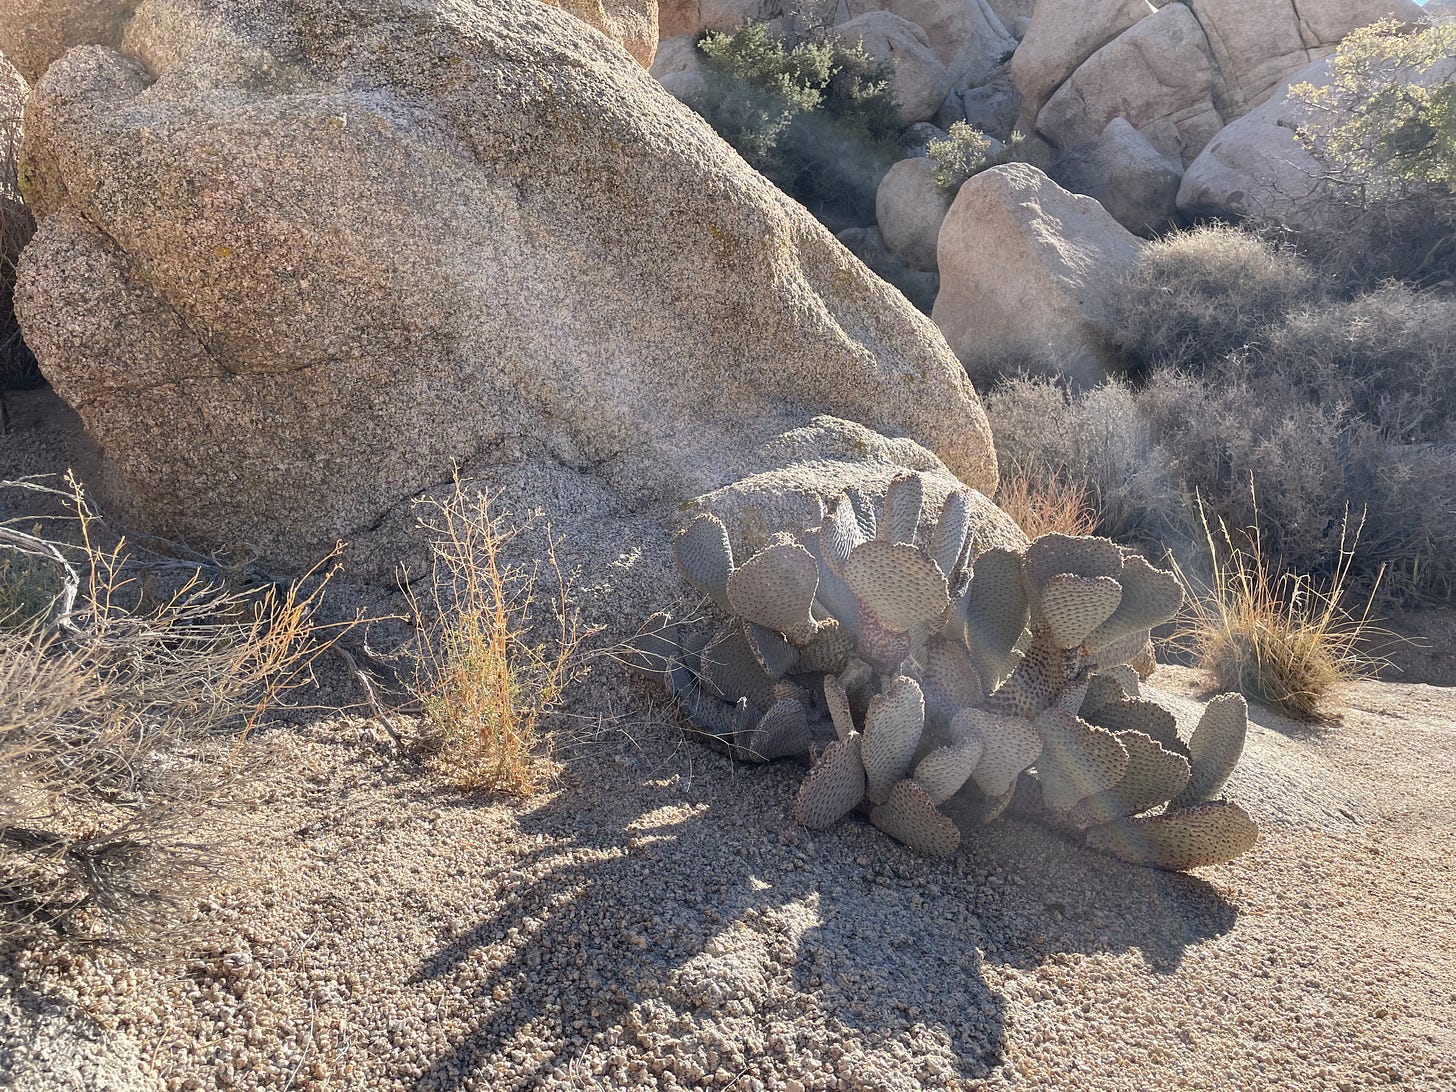 A green cactus with heart-shaped paddles rests on the ground in front of a brown rock. There are small bushes in the foreground.